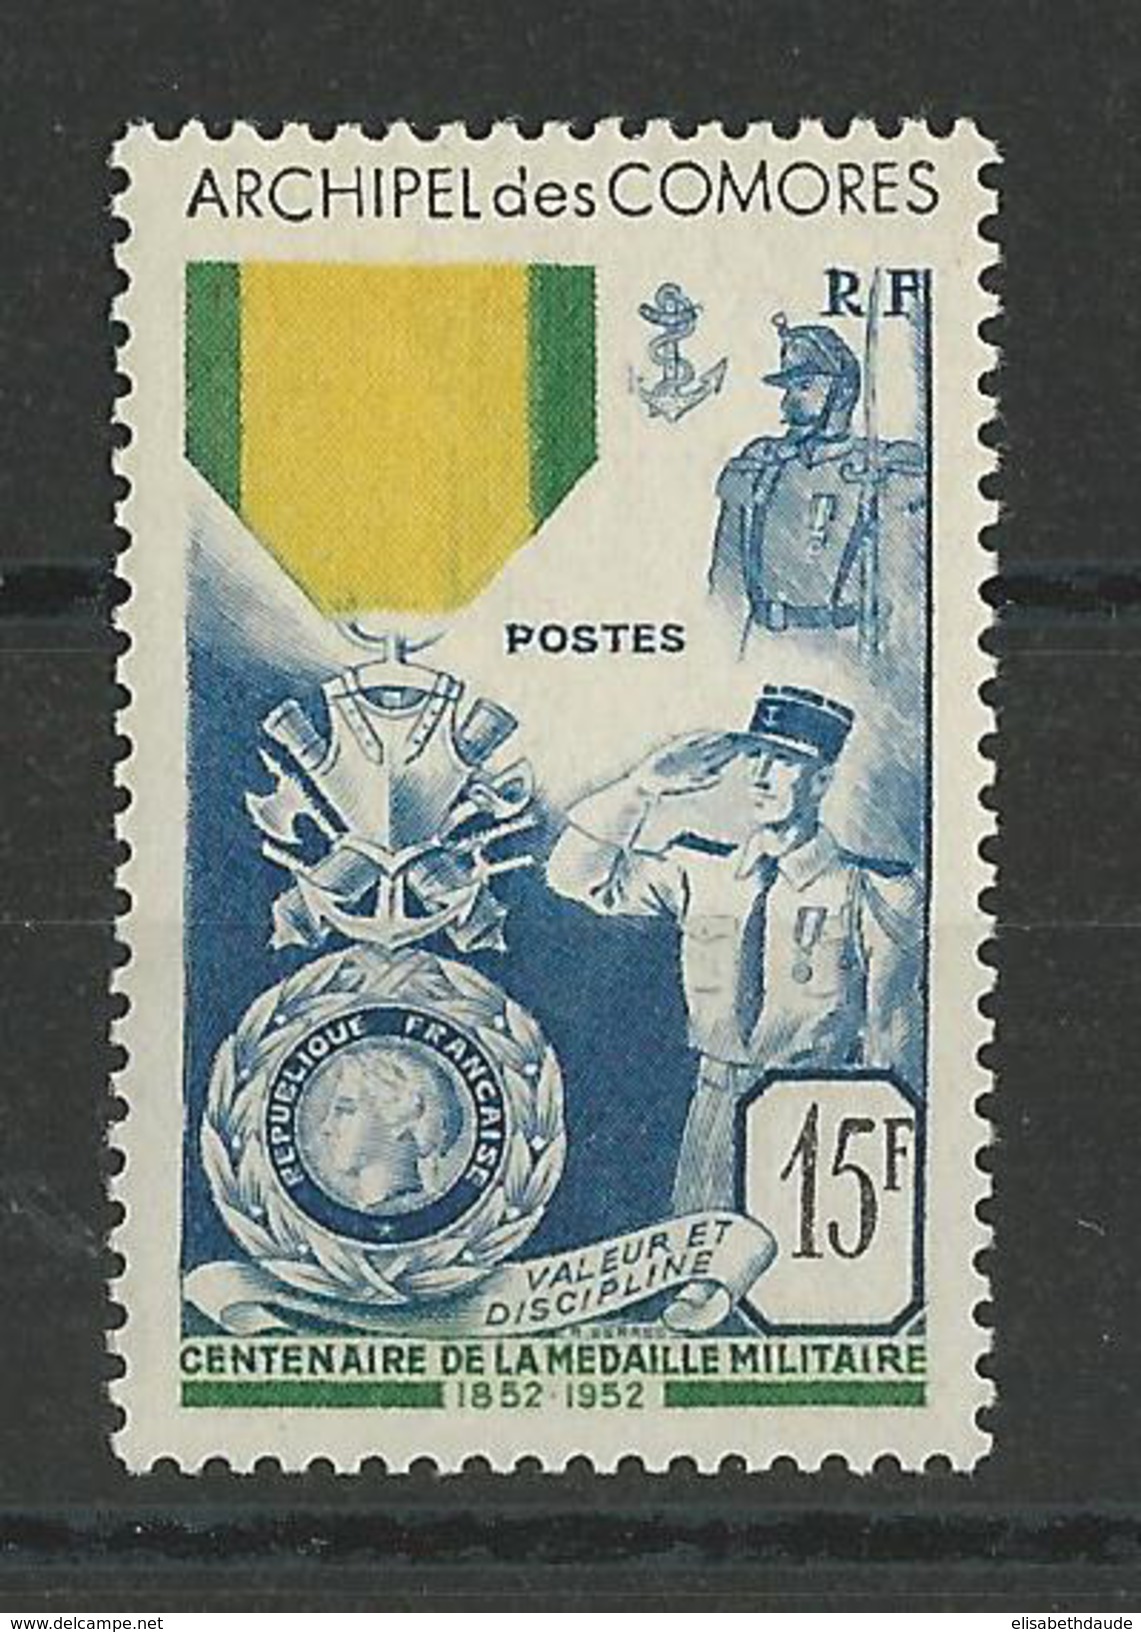 COMORES - 1952 - YVERT N°12 ** MNH - COTE = 66 EUR. - MEDAILLE MILITAIRE - Nuovi